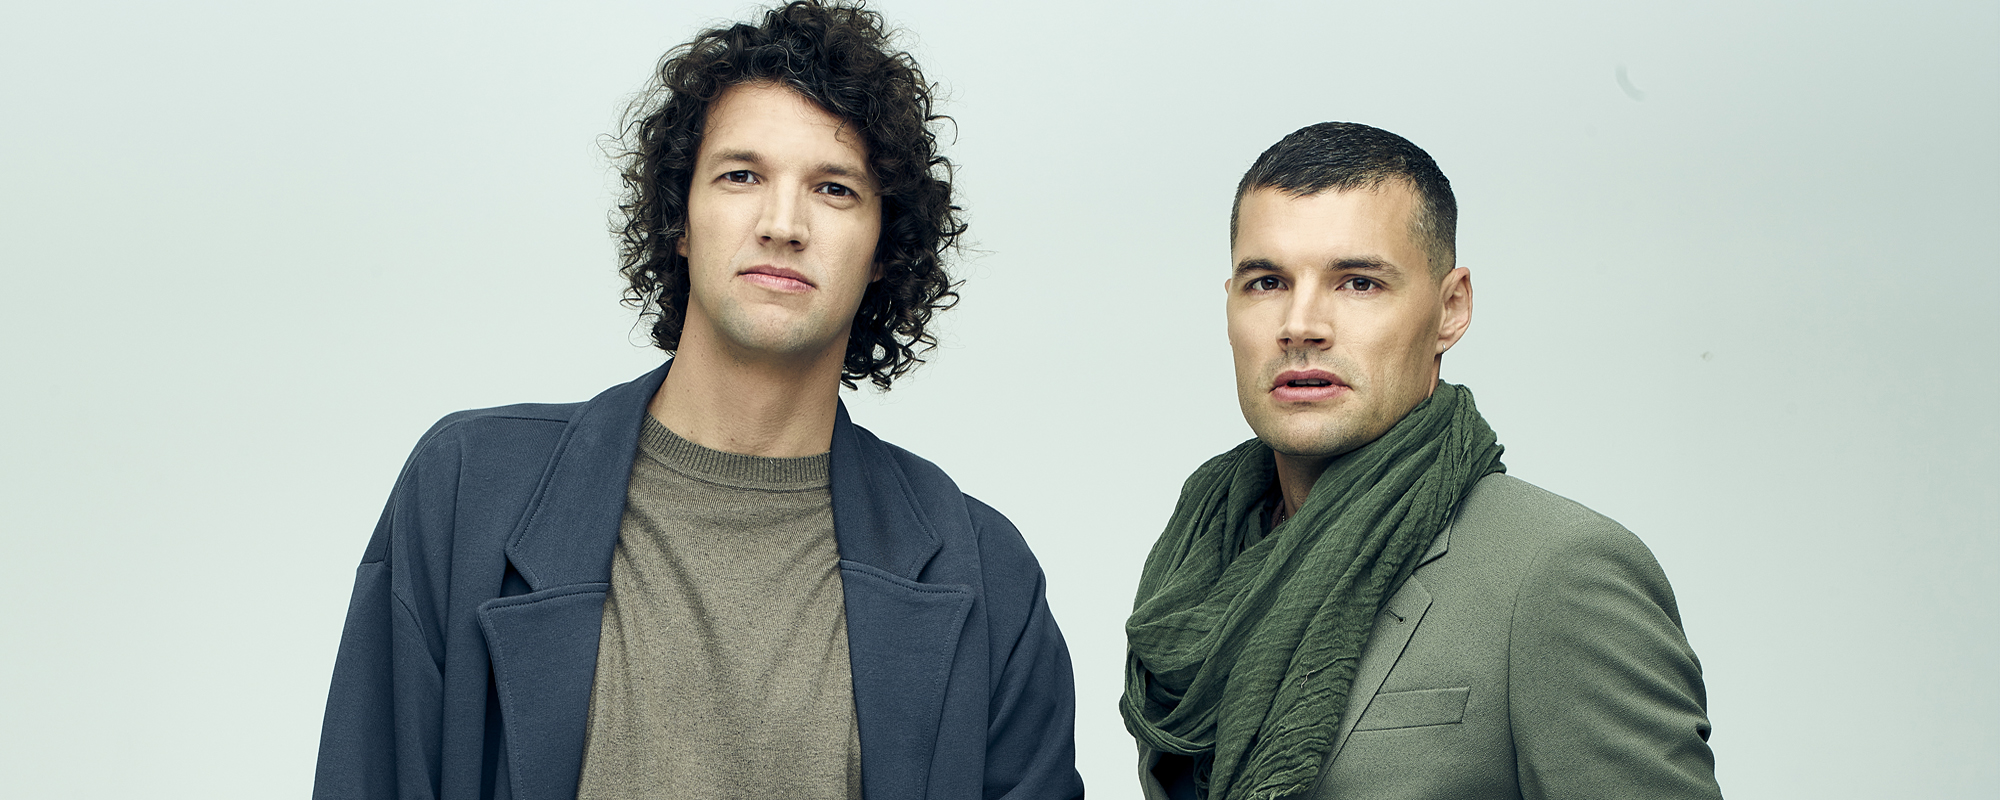 For KING & COUNTRY Serve Up One More Much-Needed Shot of Hope with Deluxe Version of ‘Burn the Ships’